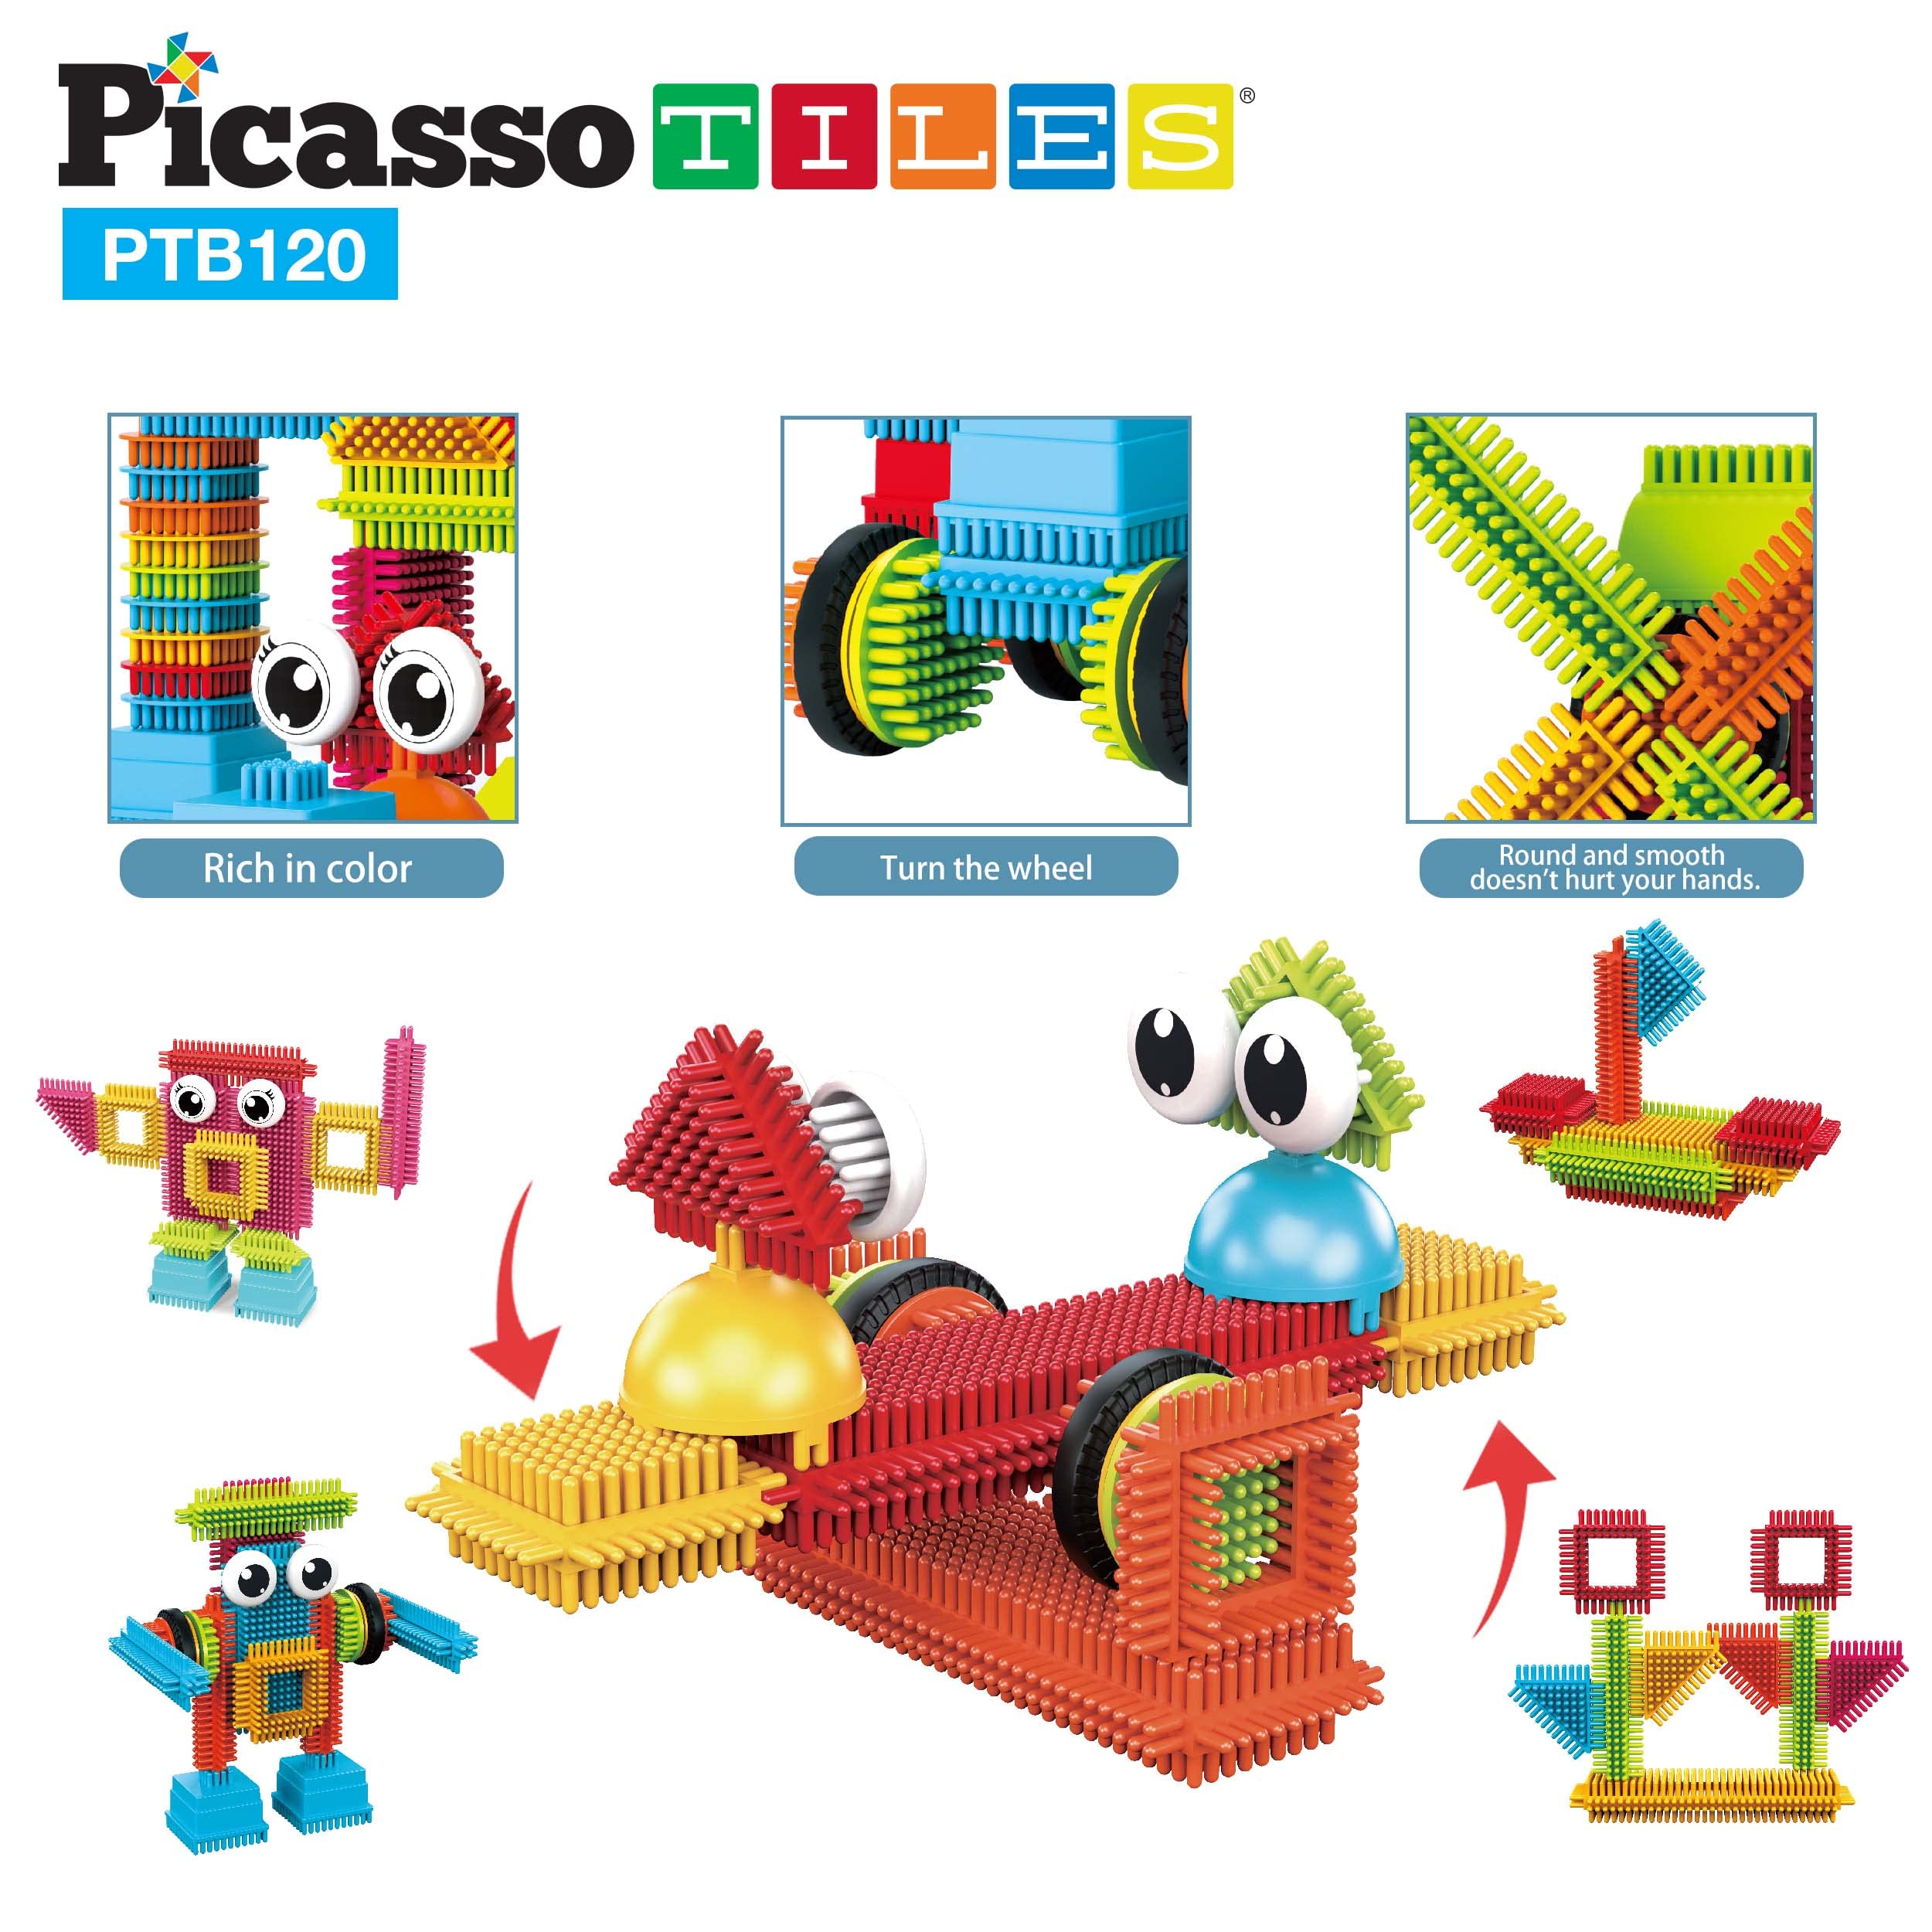 PicassoTiles 151PC + 120PC Bristle Shape 3D Building Blocks, Includes Truck Theme Set with Animal Figures: STEAM Learning & Educational Sensory Playset for Preschool and Kindergarten Kids Ages 3+